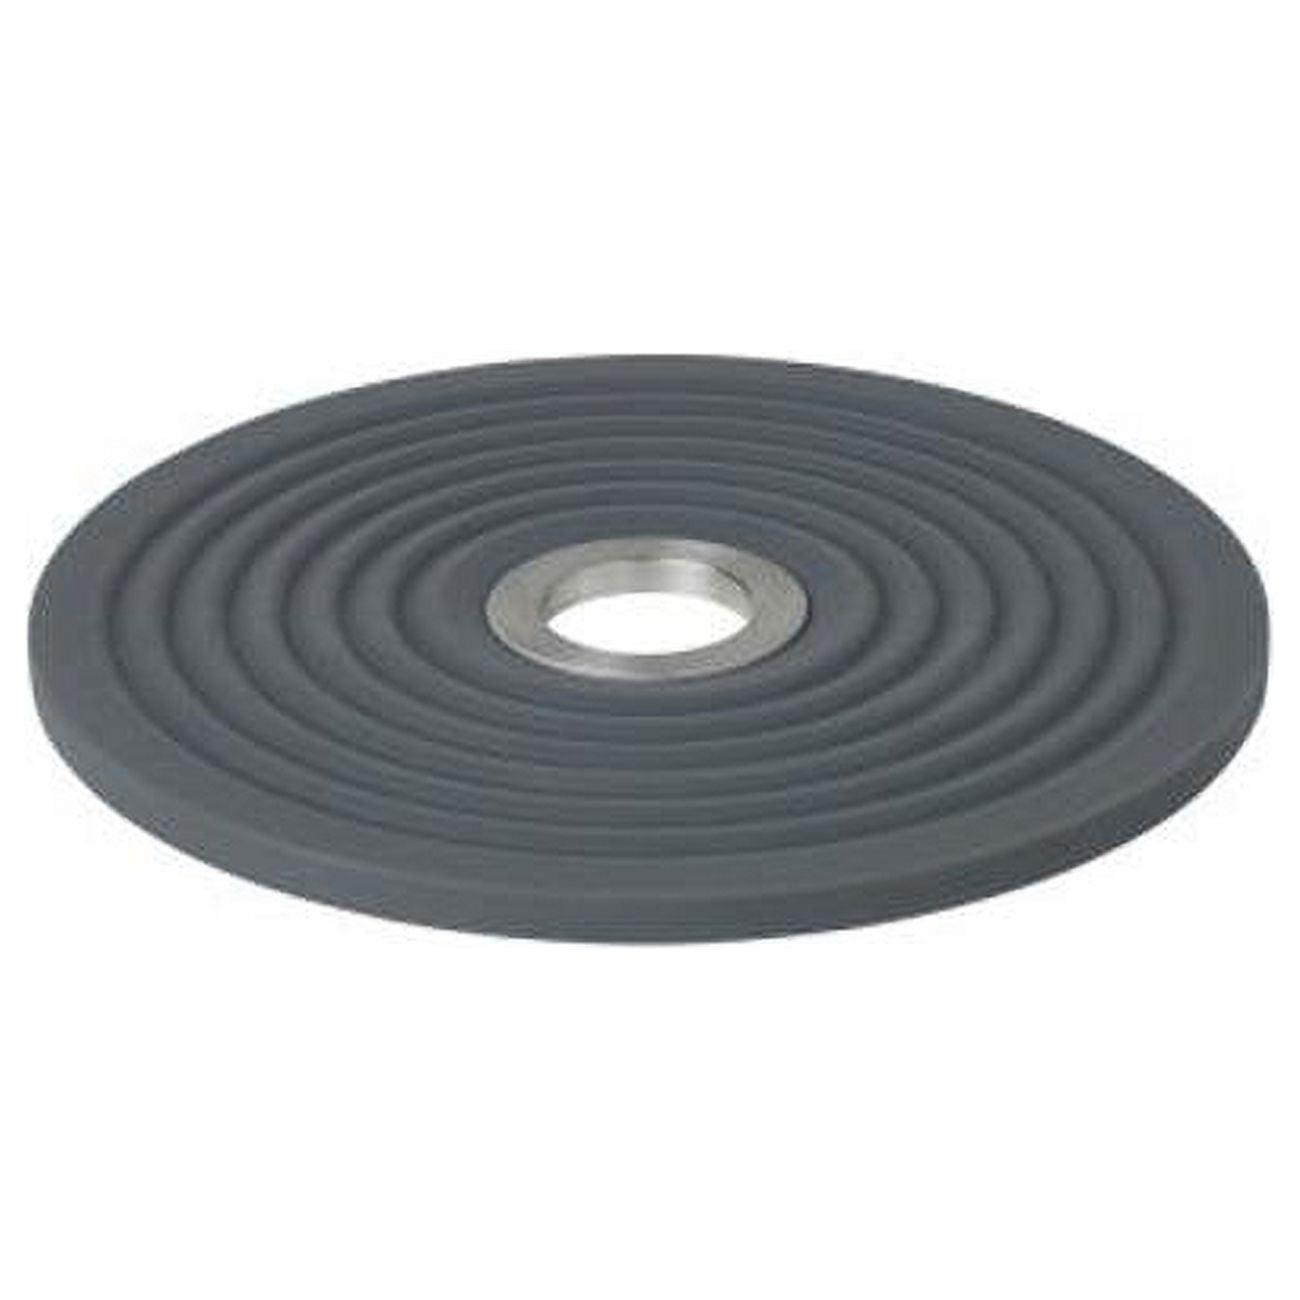 63778 Oolong Round Silicone Trivet - Magnet